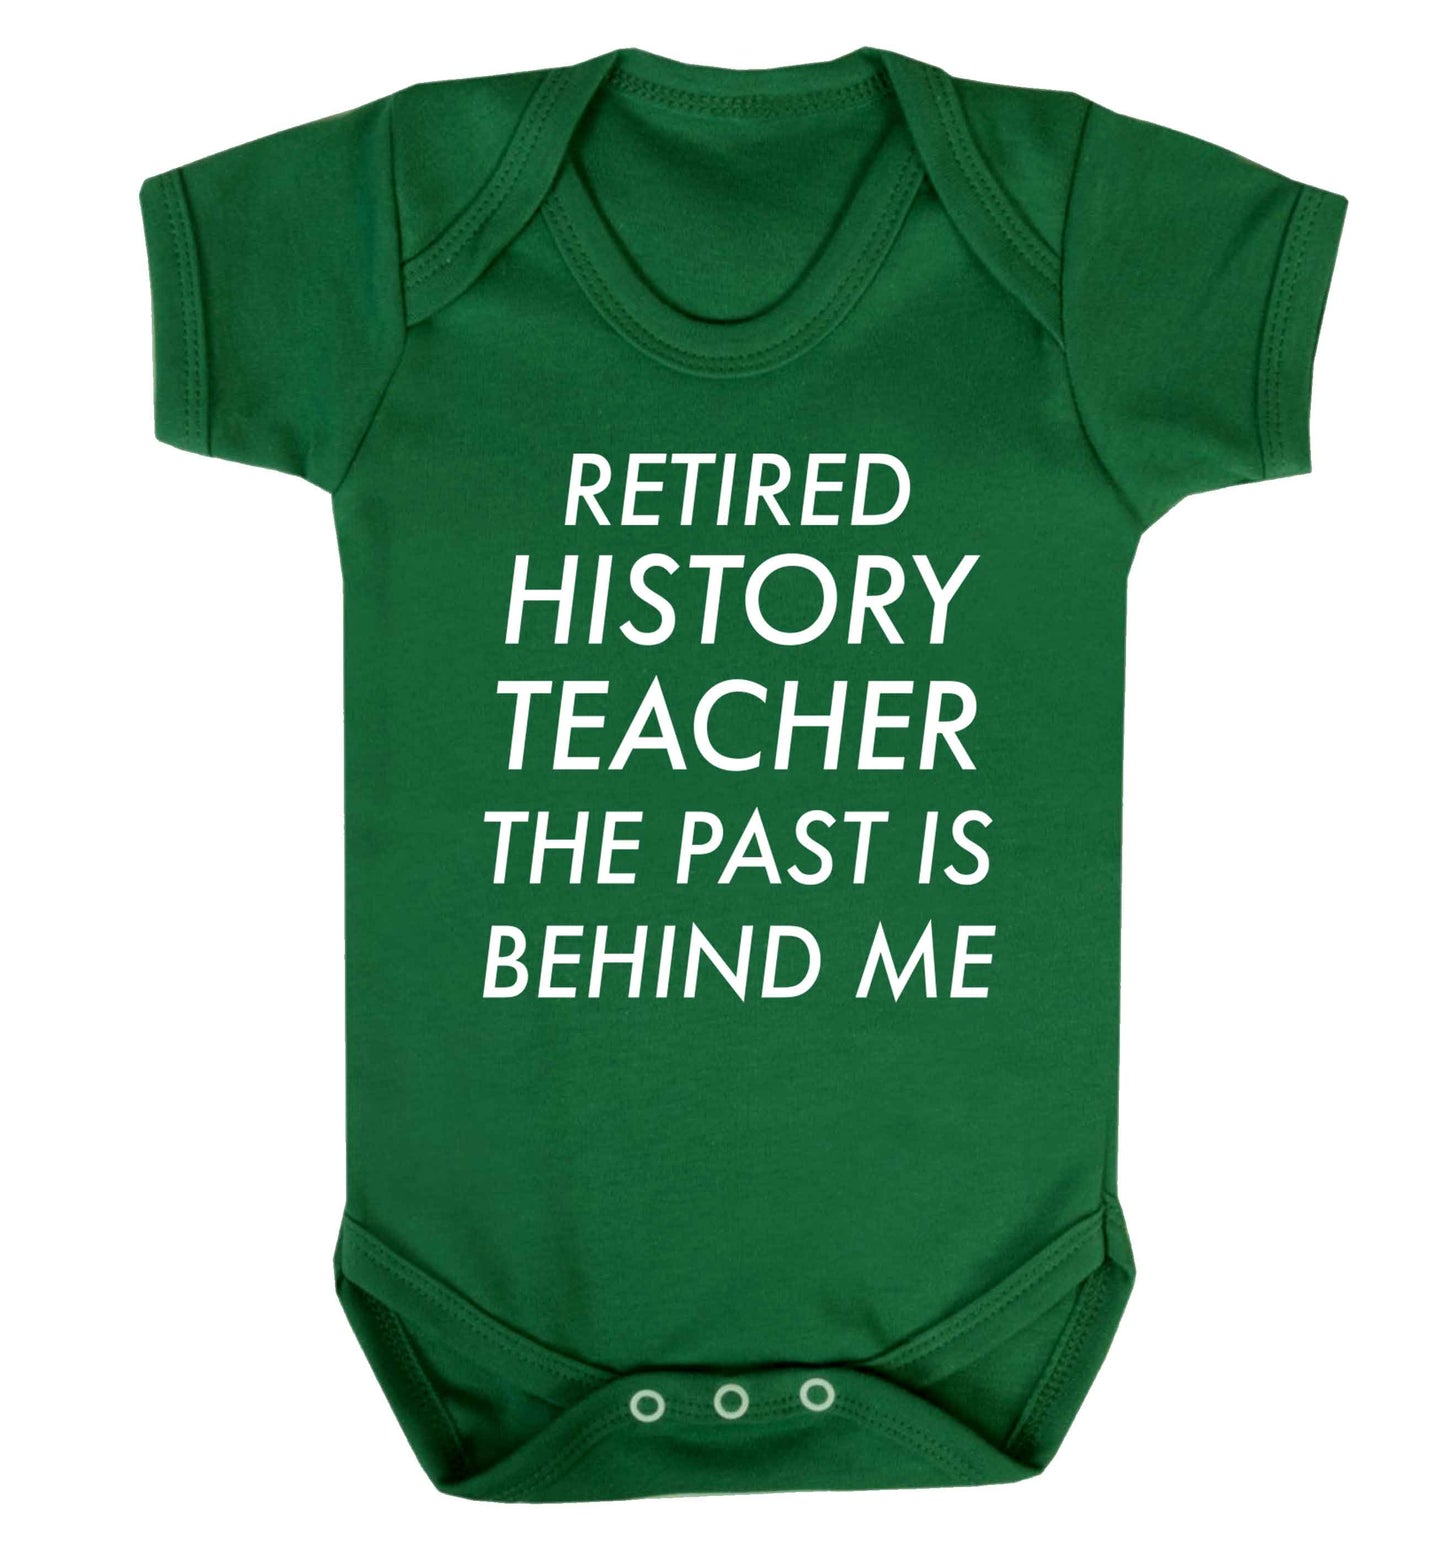 Retired history teacher the past is behind me Baby Vest green 18-24 months